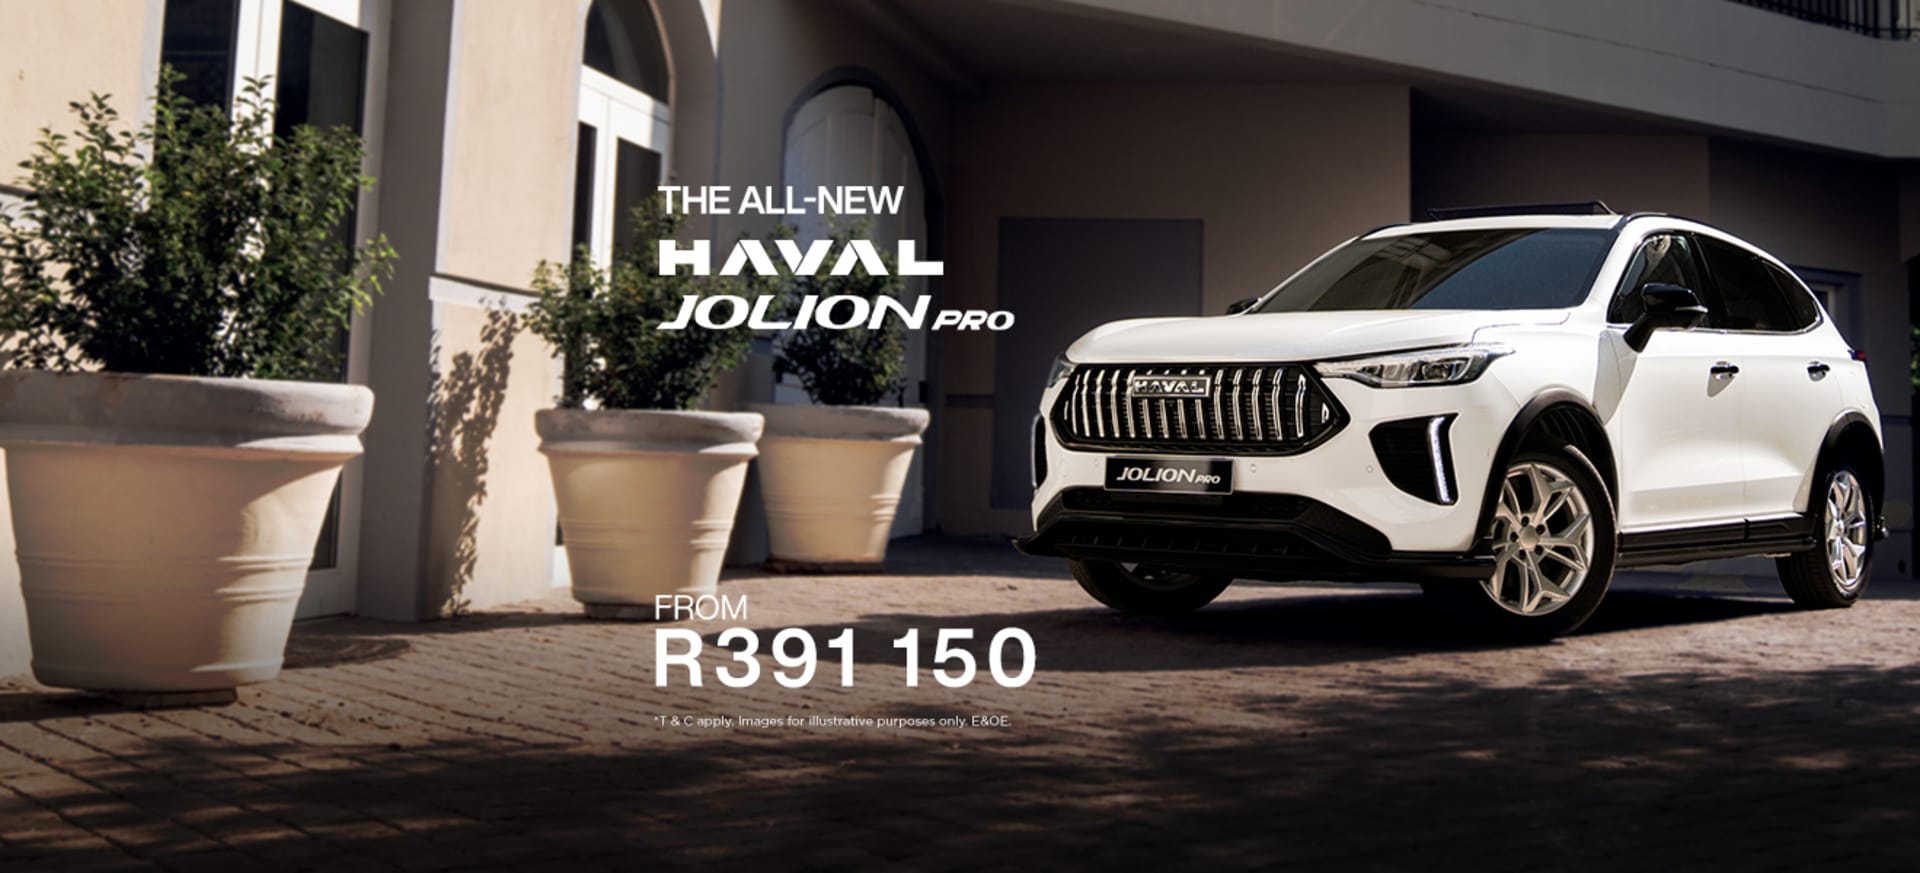 New HAVAL Jolion PRO from R391 150*